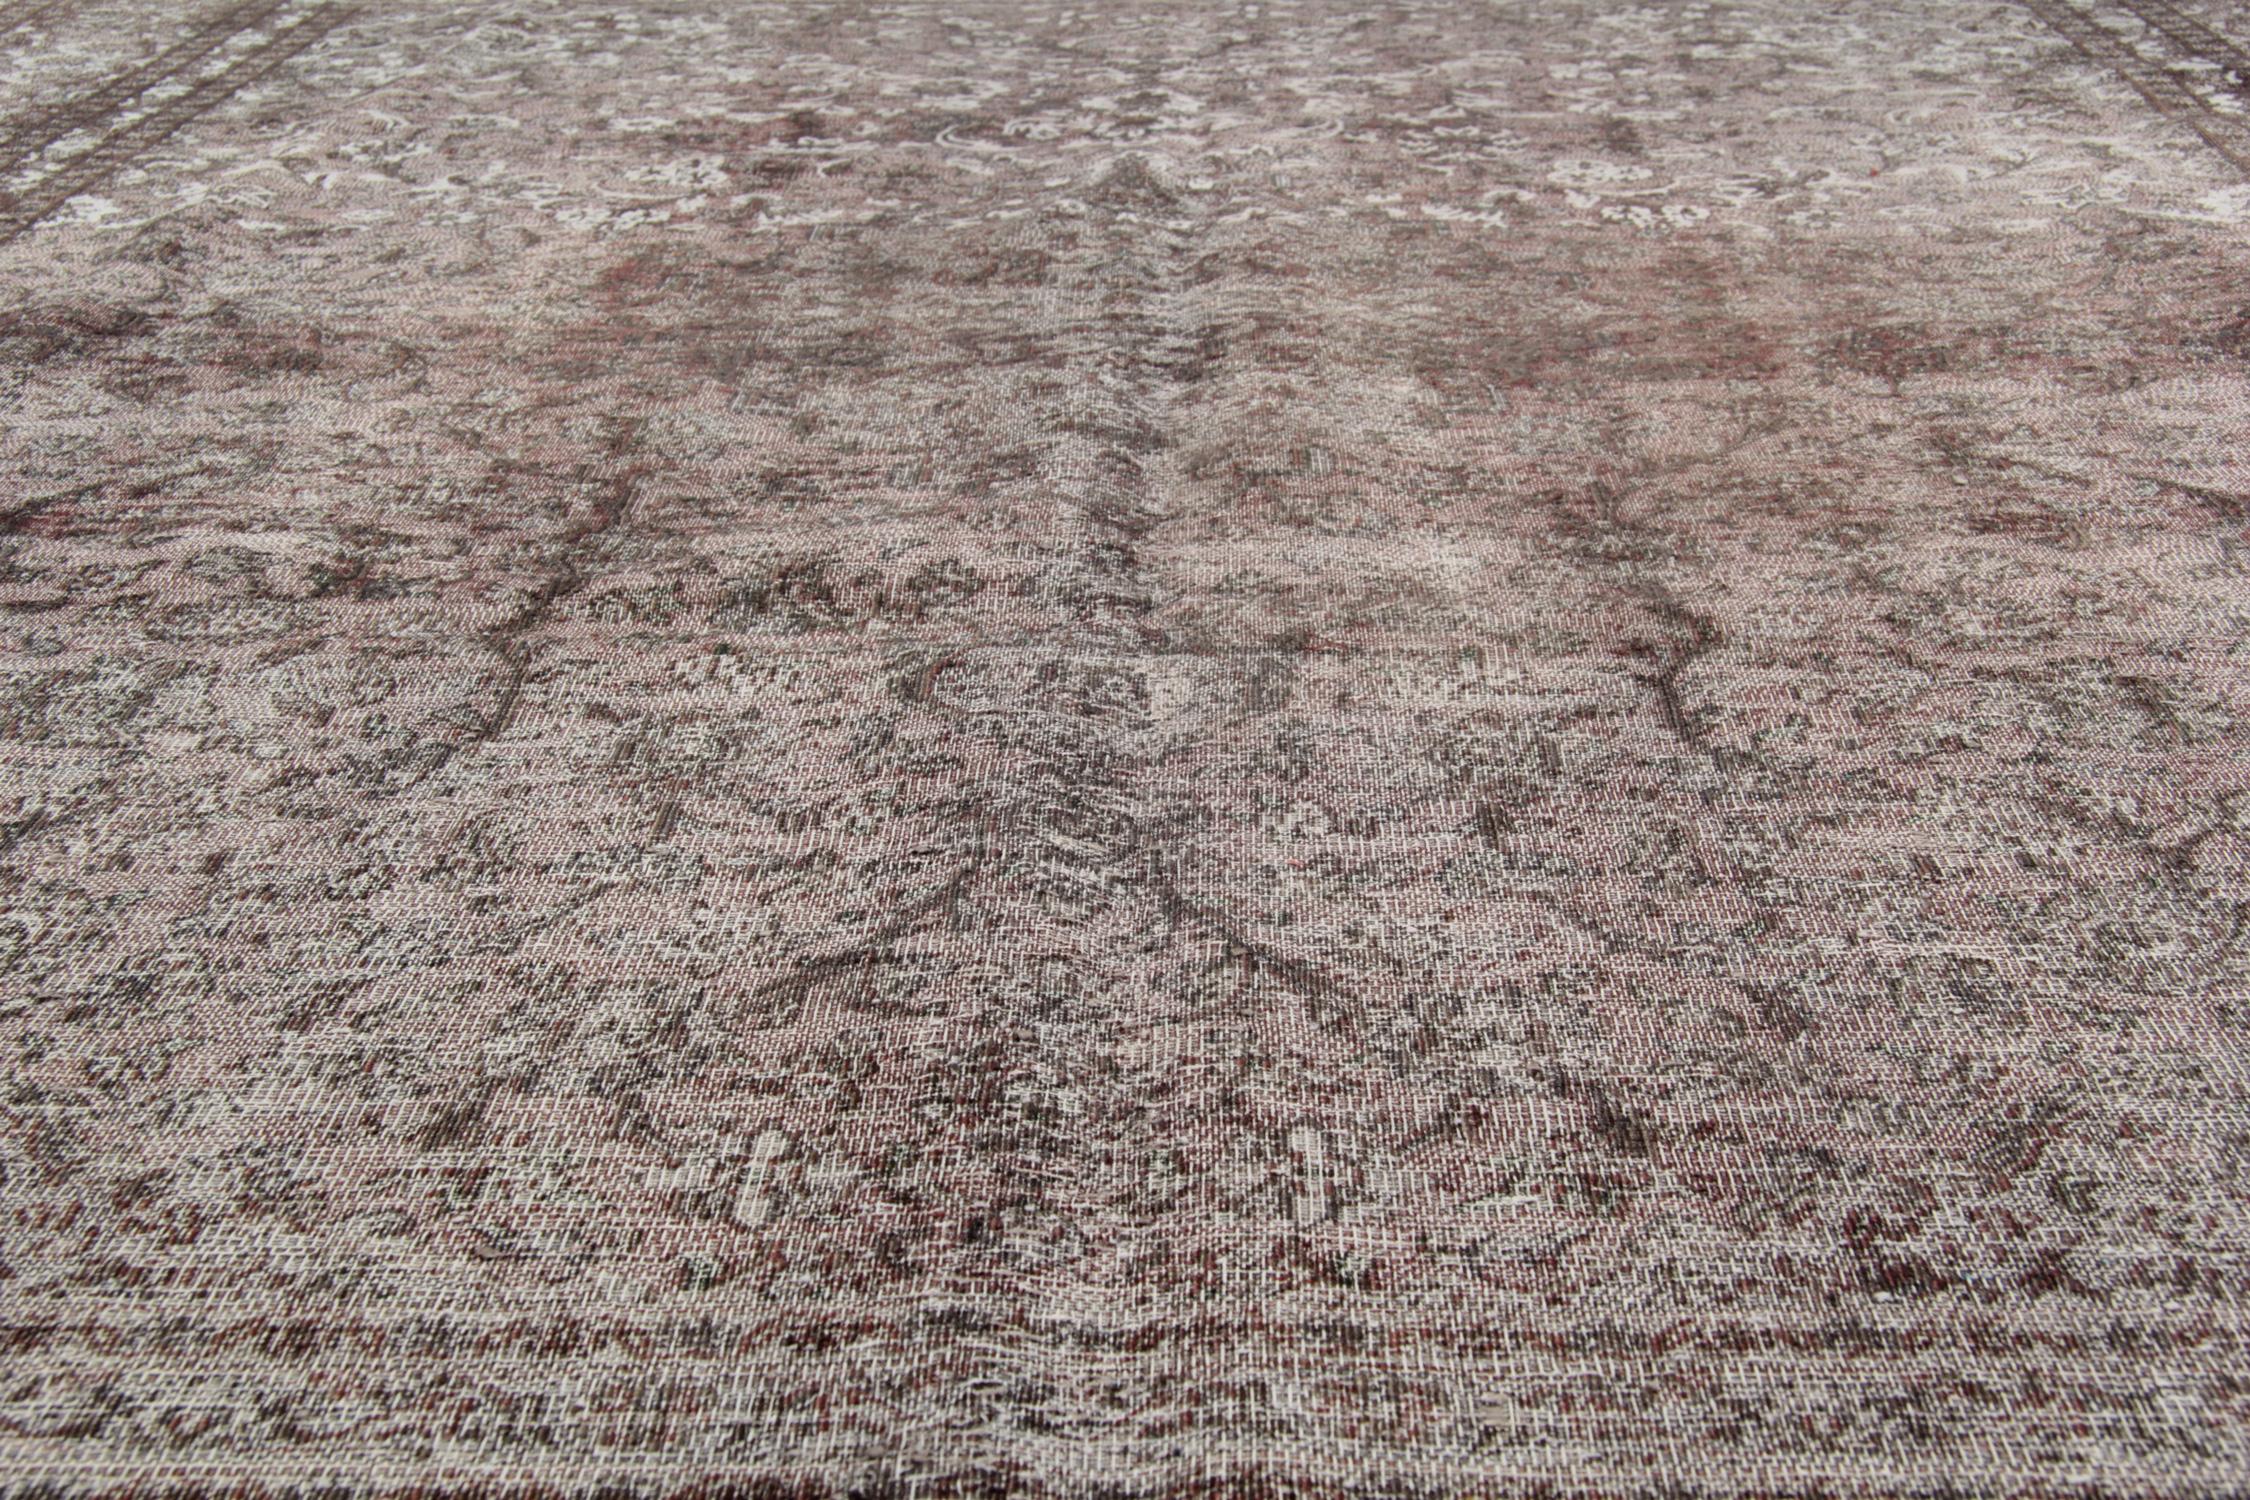 Brushed Vintage Painted Persian Rugs, over Dyed Grey Rug Carept, Area Rugs for Sale